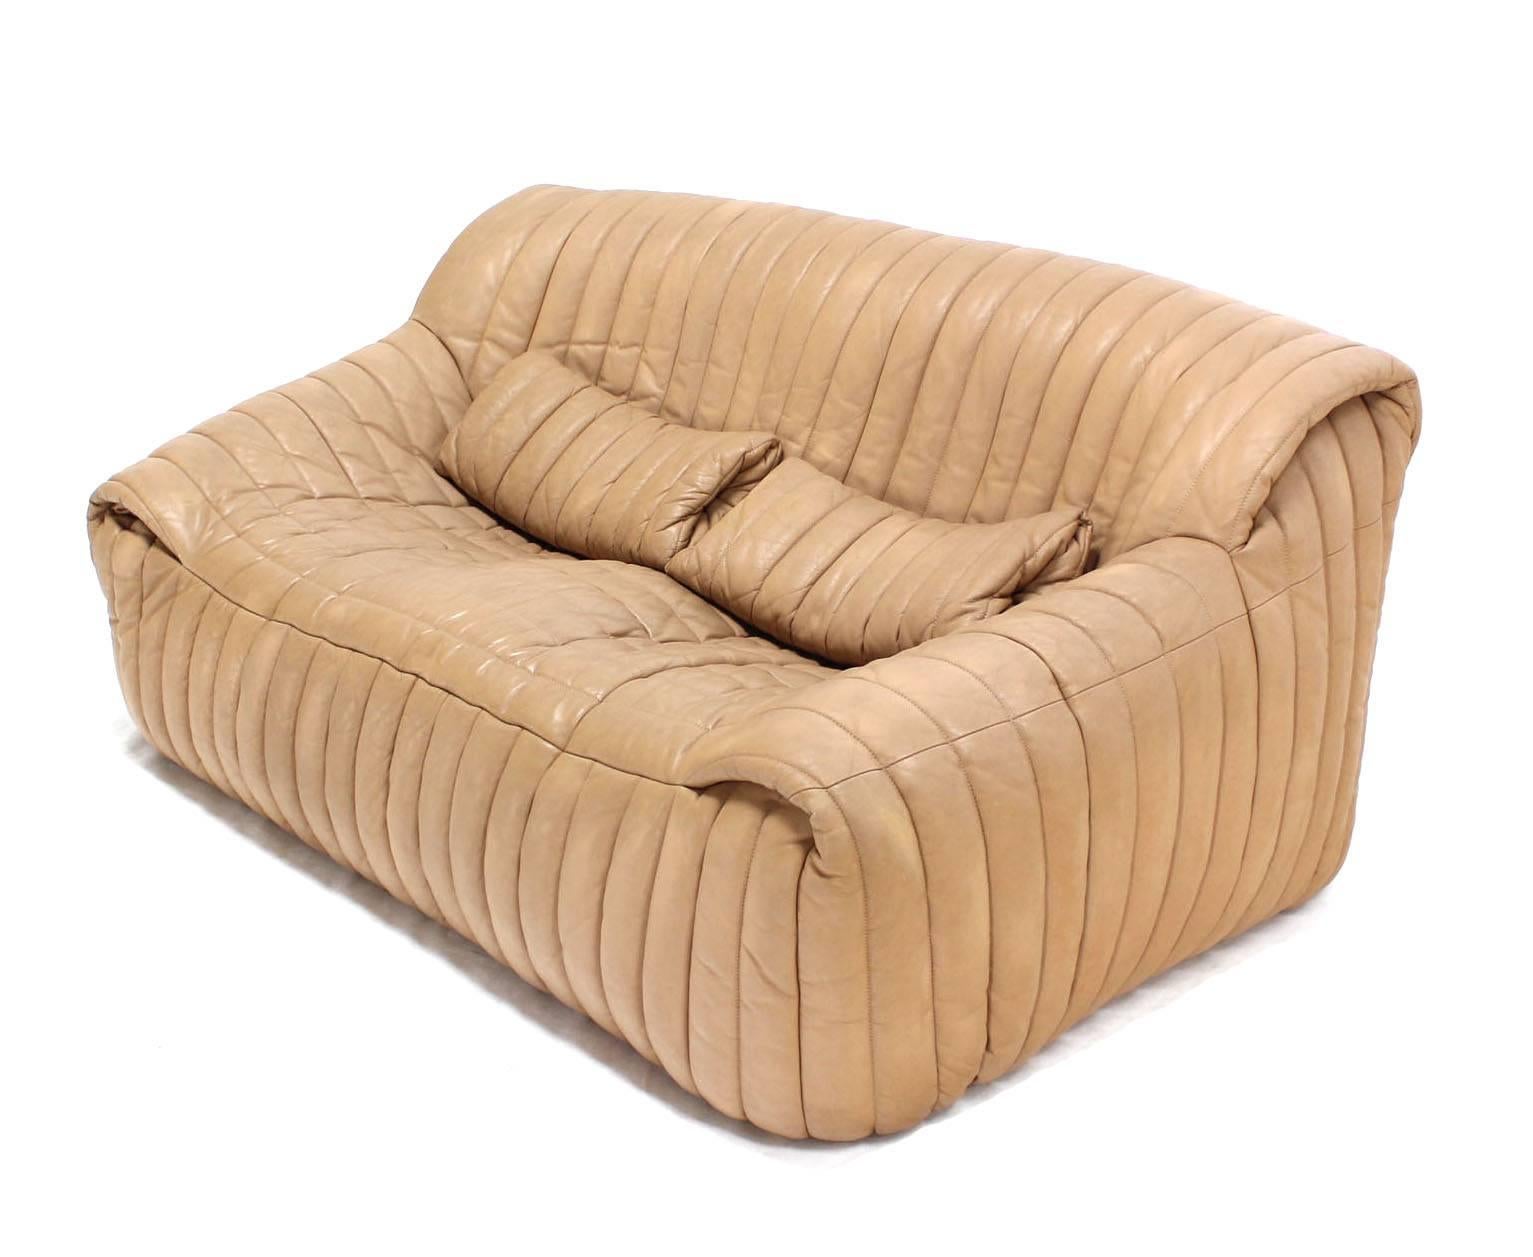 ribbed leather couch